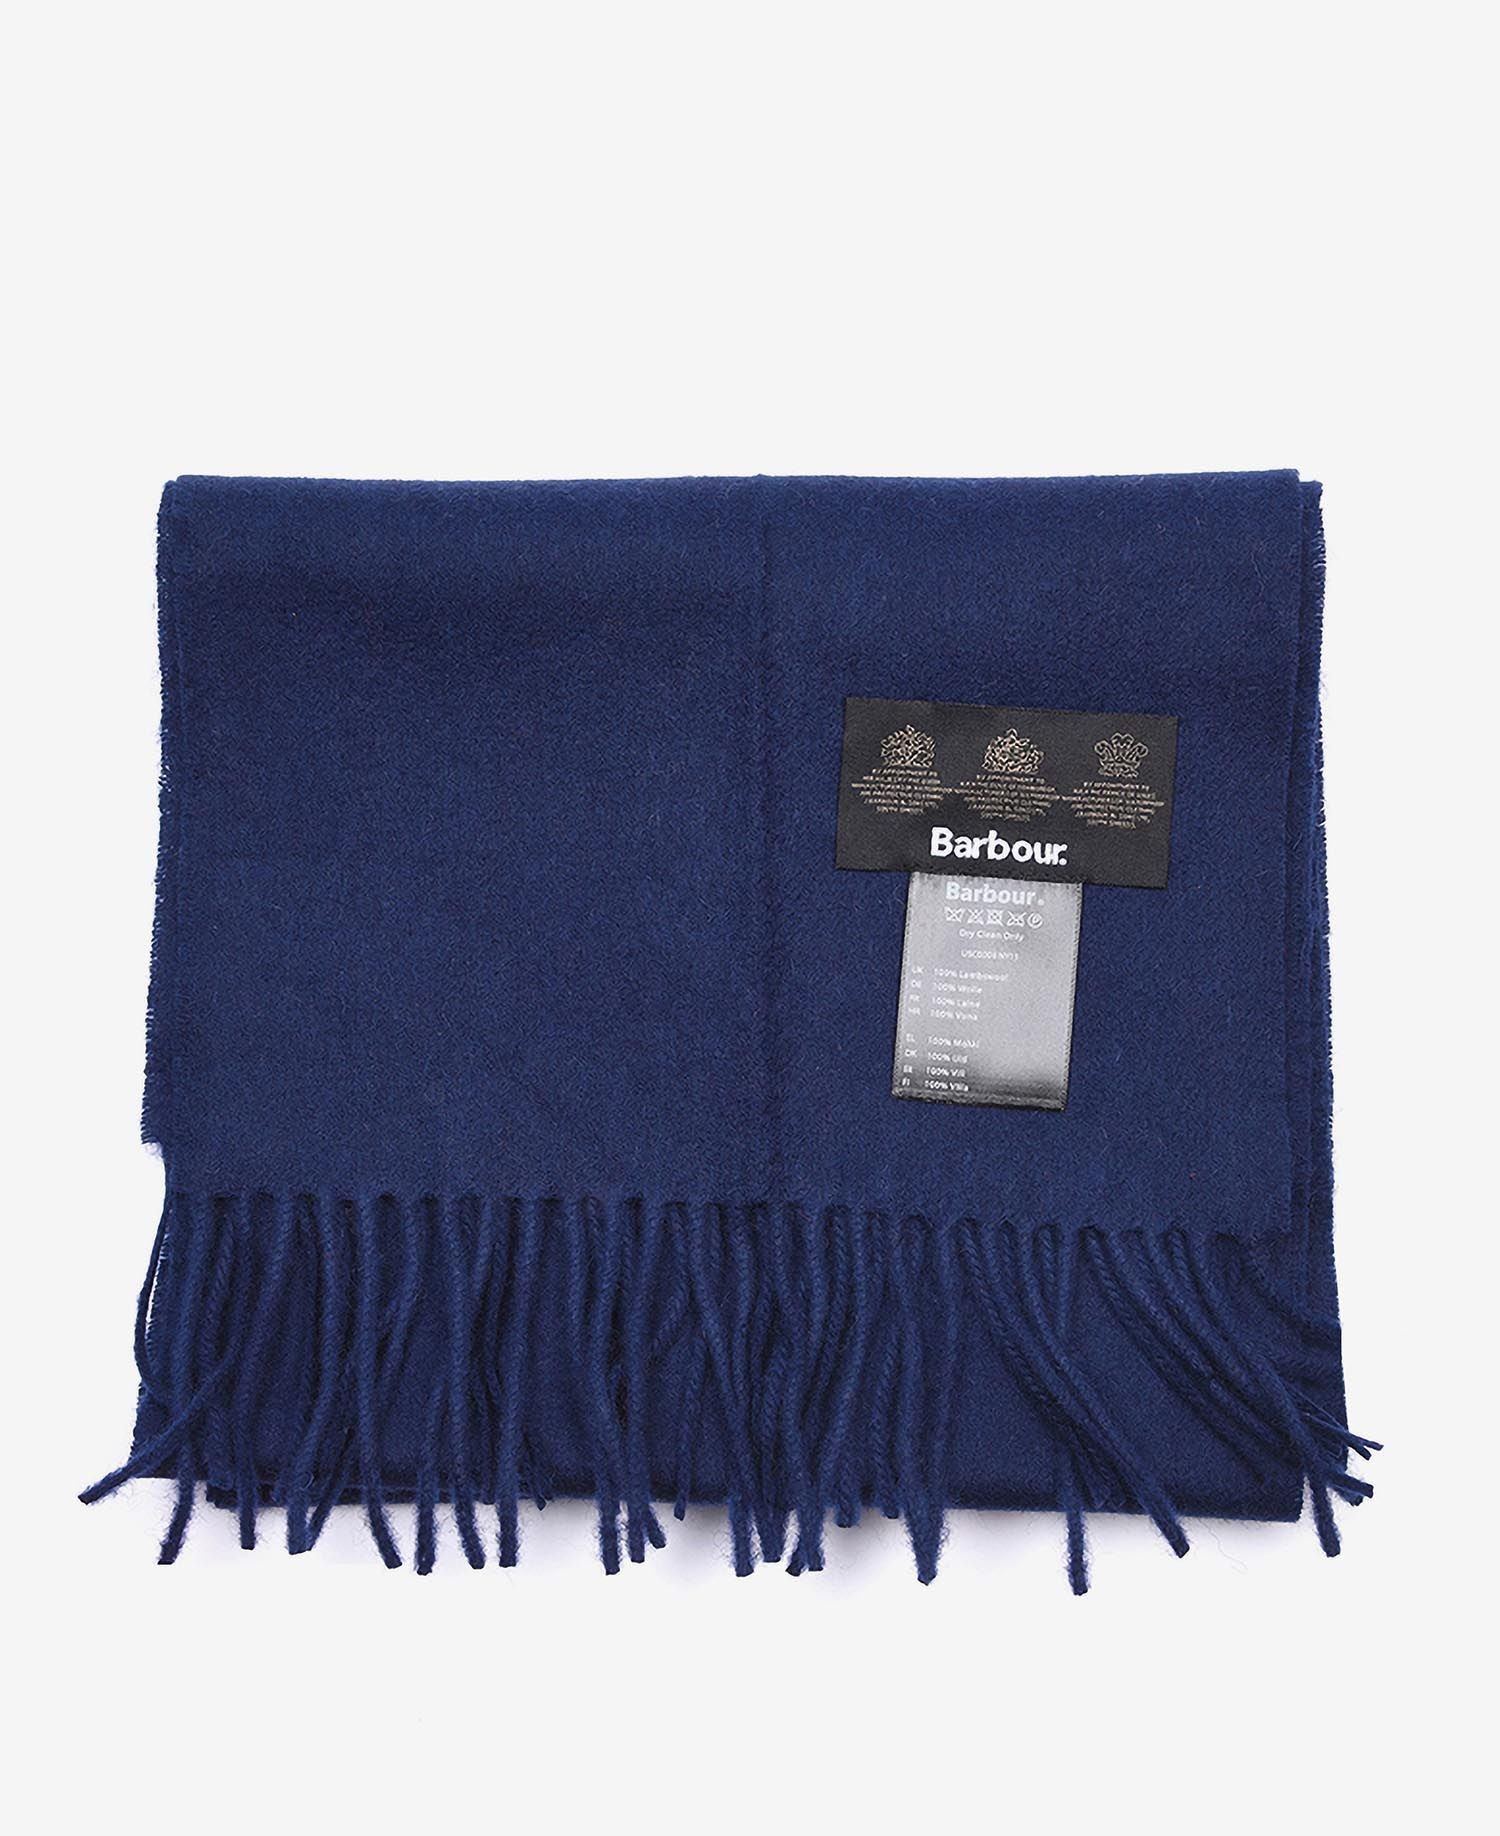 Barbour Plain Lambswool Scarf NY11 Navy